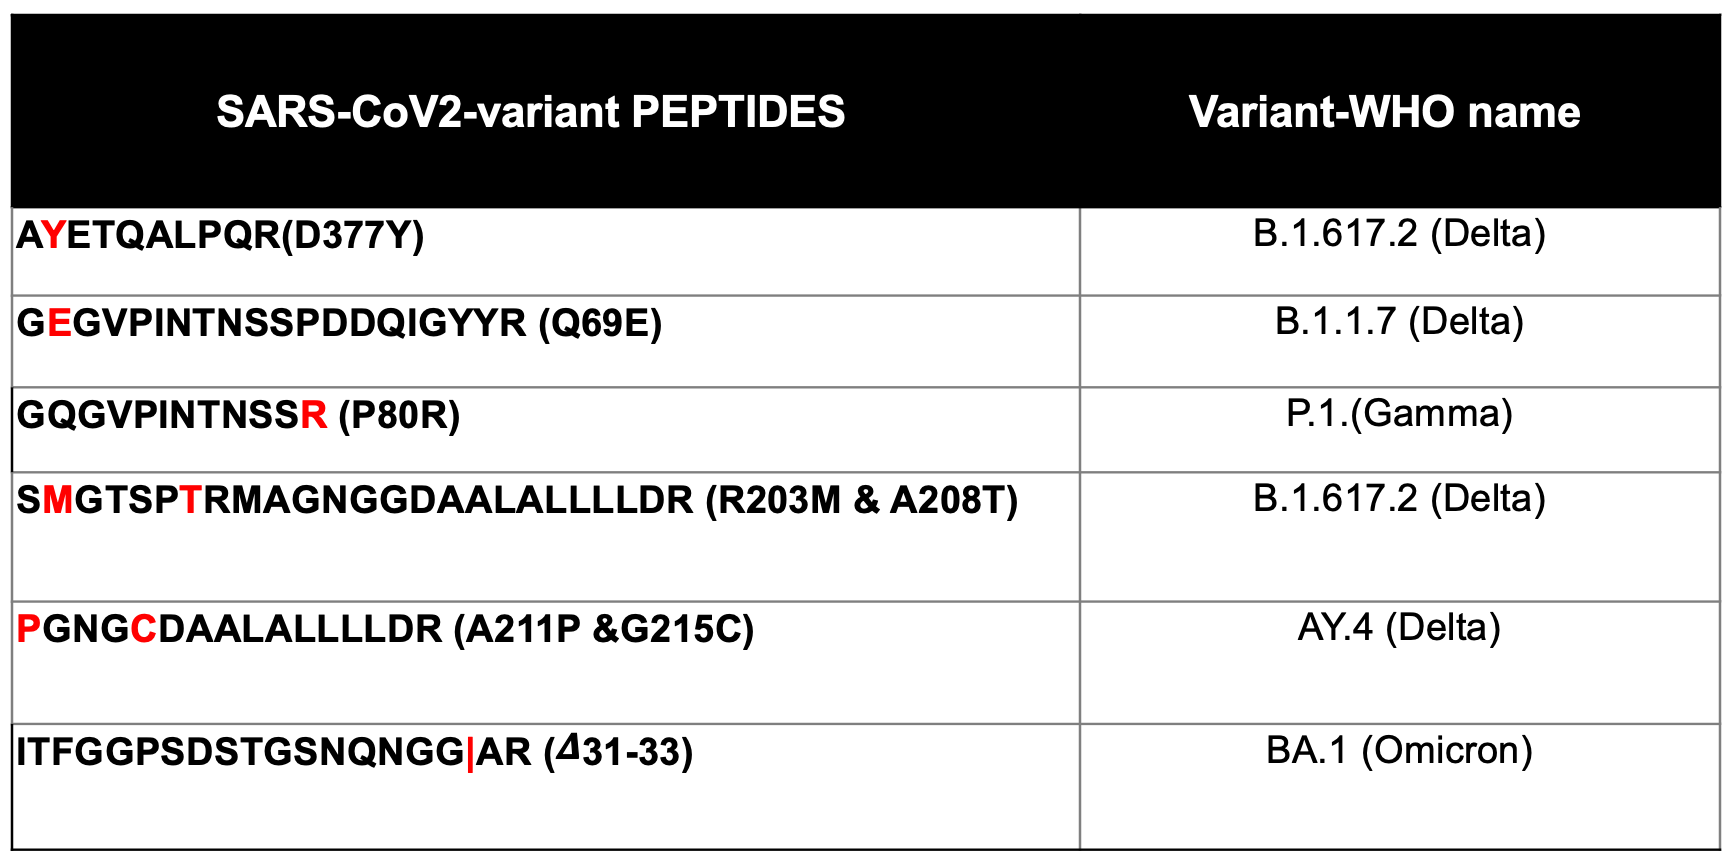 Peptides with amino acid variants in different WHO Variants of concern